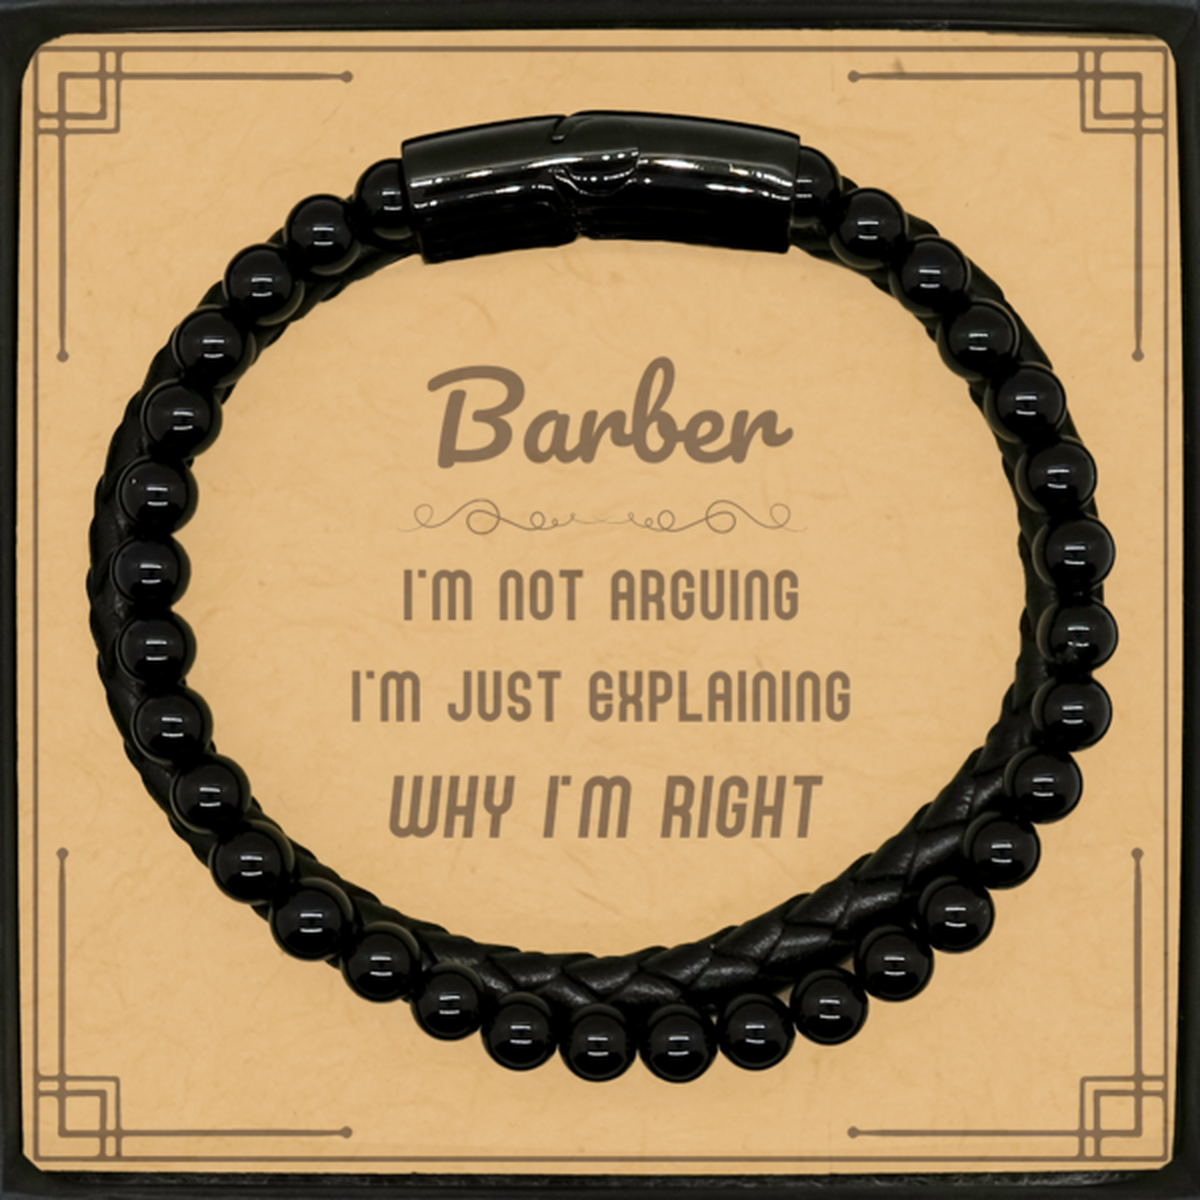 Barber I'm not Arguing. I'm Just Explaining Why I'm RIGHT Stone Leather Bracelets, Funny Saying Quote Barber Gifts For Barber Message Card Graduation Birthday Christmas Gifts for Men Women Coworker